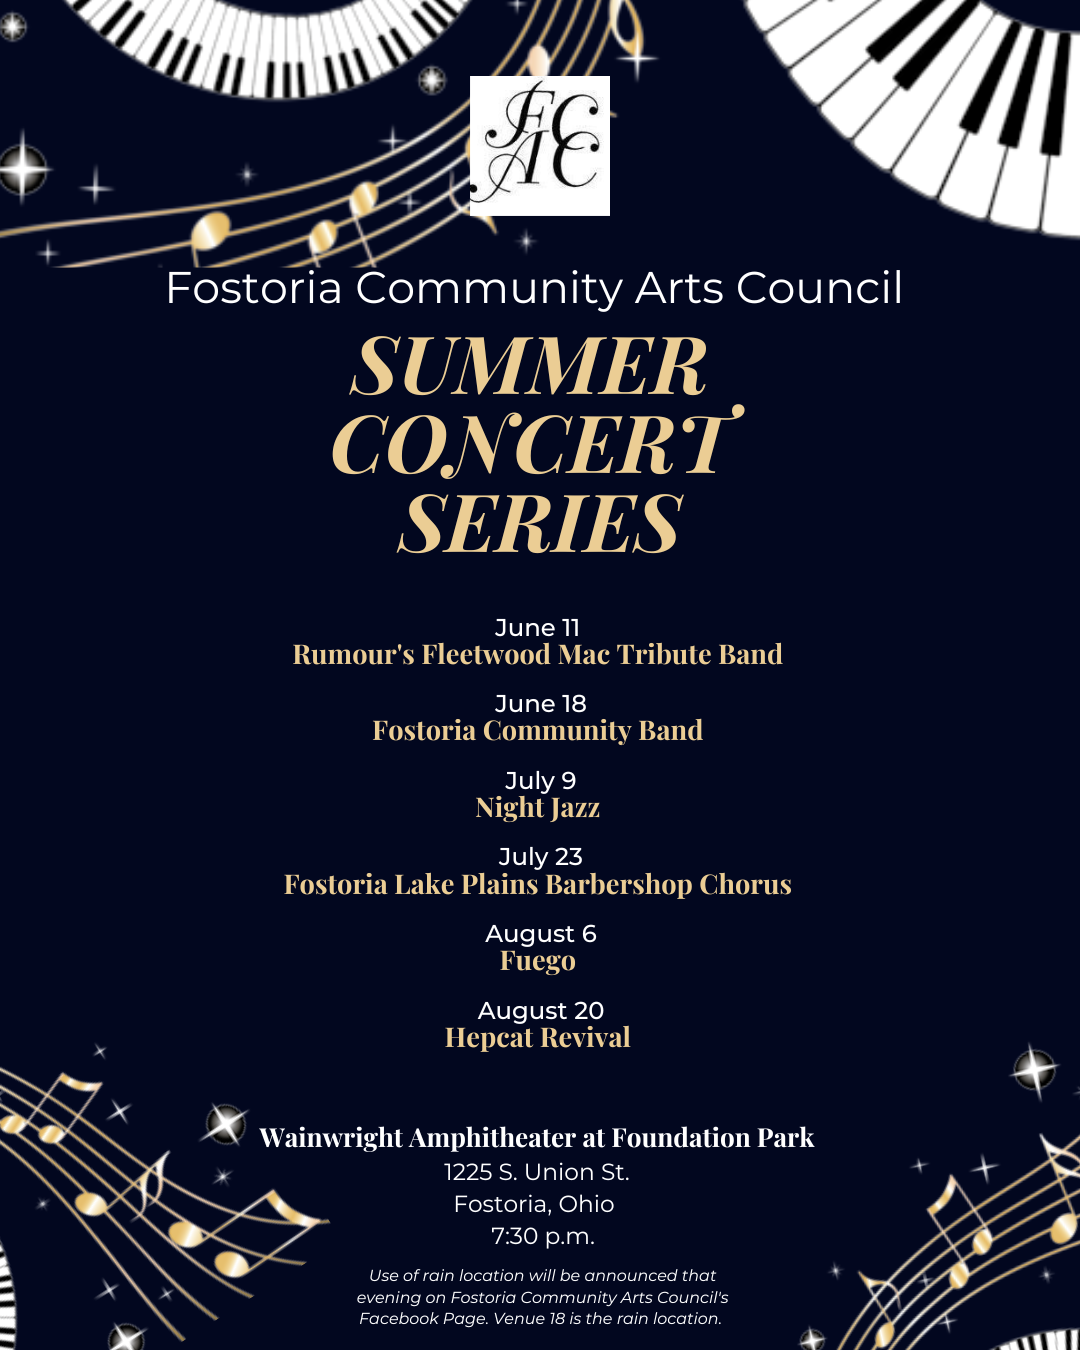 FCAC Summer Concert Series -  Rumour's Fleetwood Mac Tribute Band